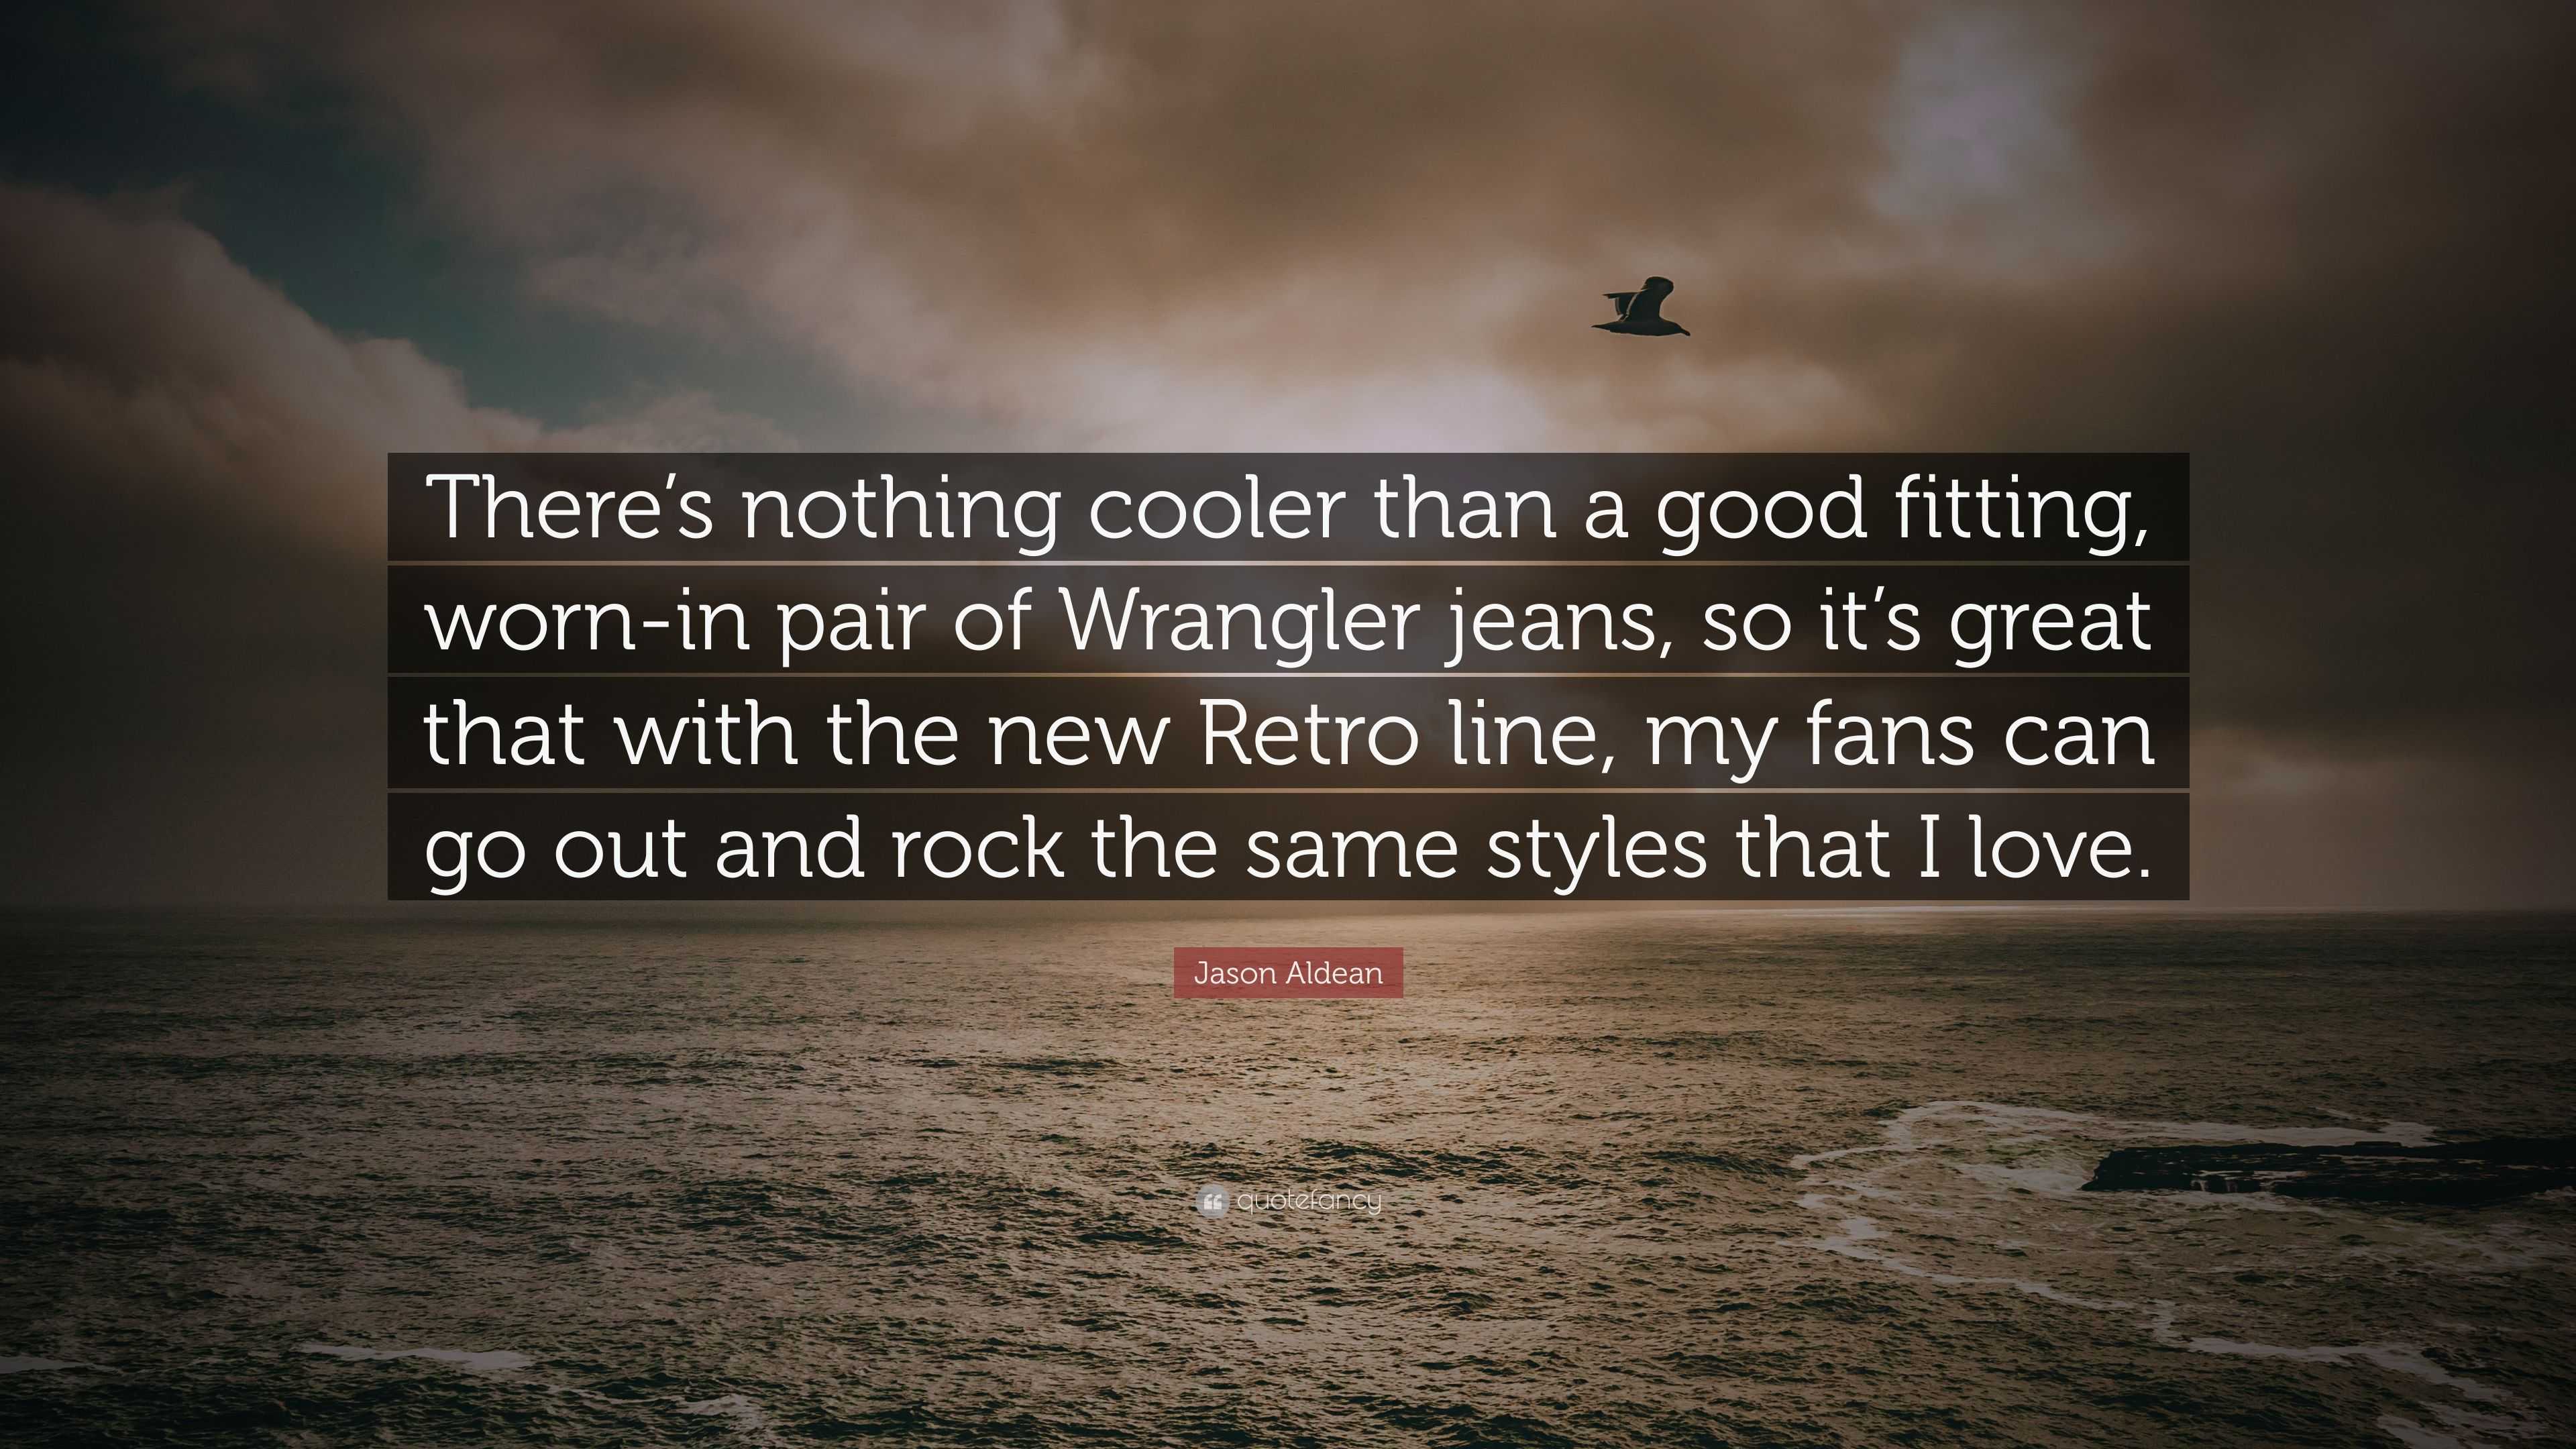 Jason Aldean Quote: “There's nothing cooler than a good fitting, worn-in  pair of Wrangler jeans, so it's great that with the new Retro line, ...”